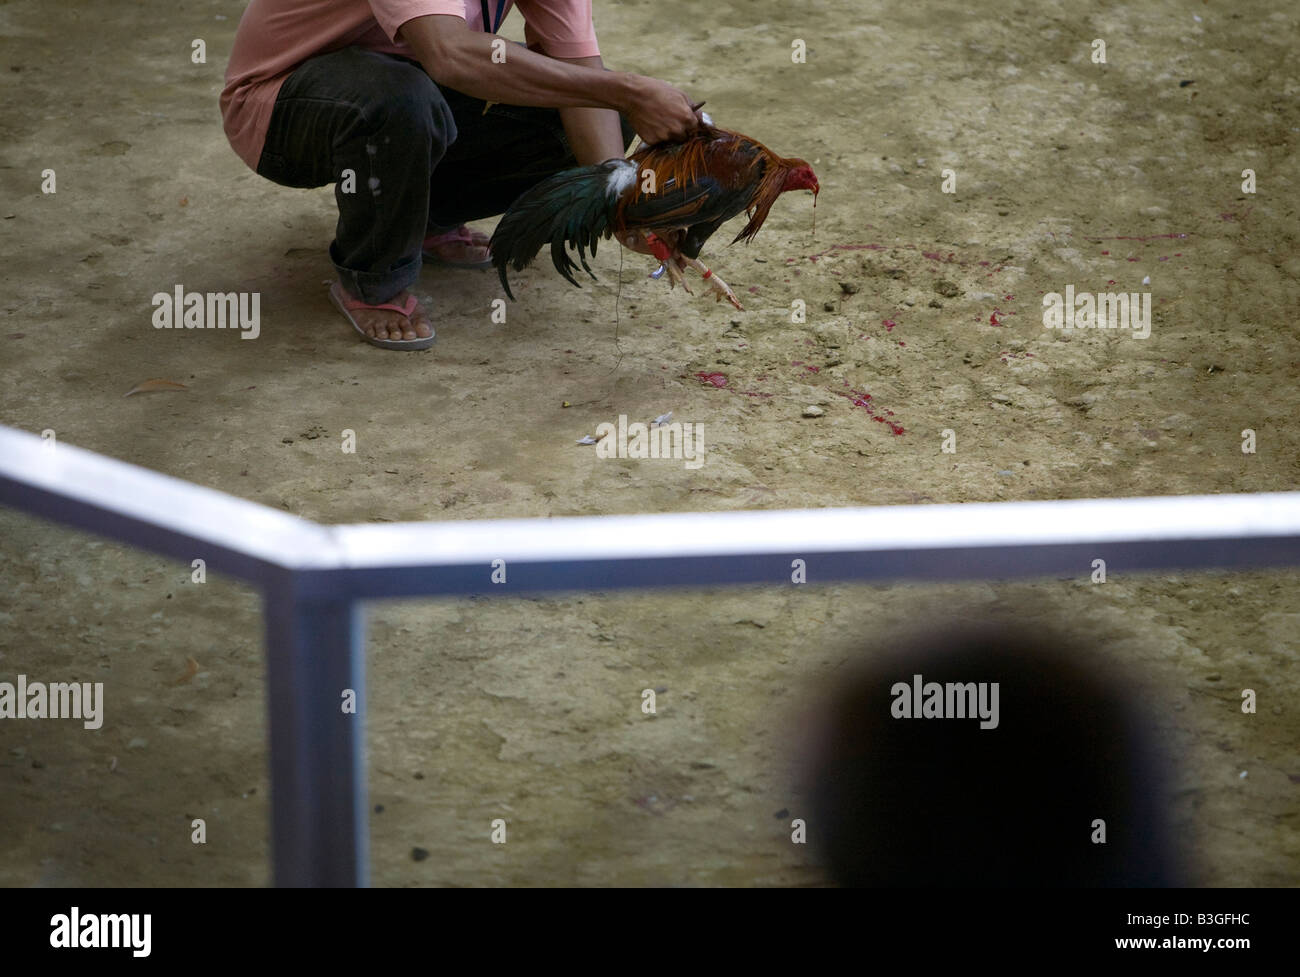 A Filipino collects a mortally-wounded fighting cock during a cockfight near Mansalay, Oriental Mindoro, Philippines. Stock Photo